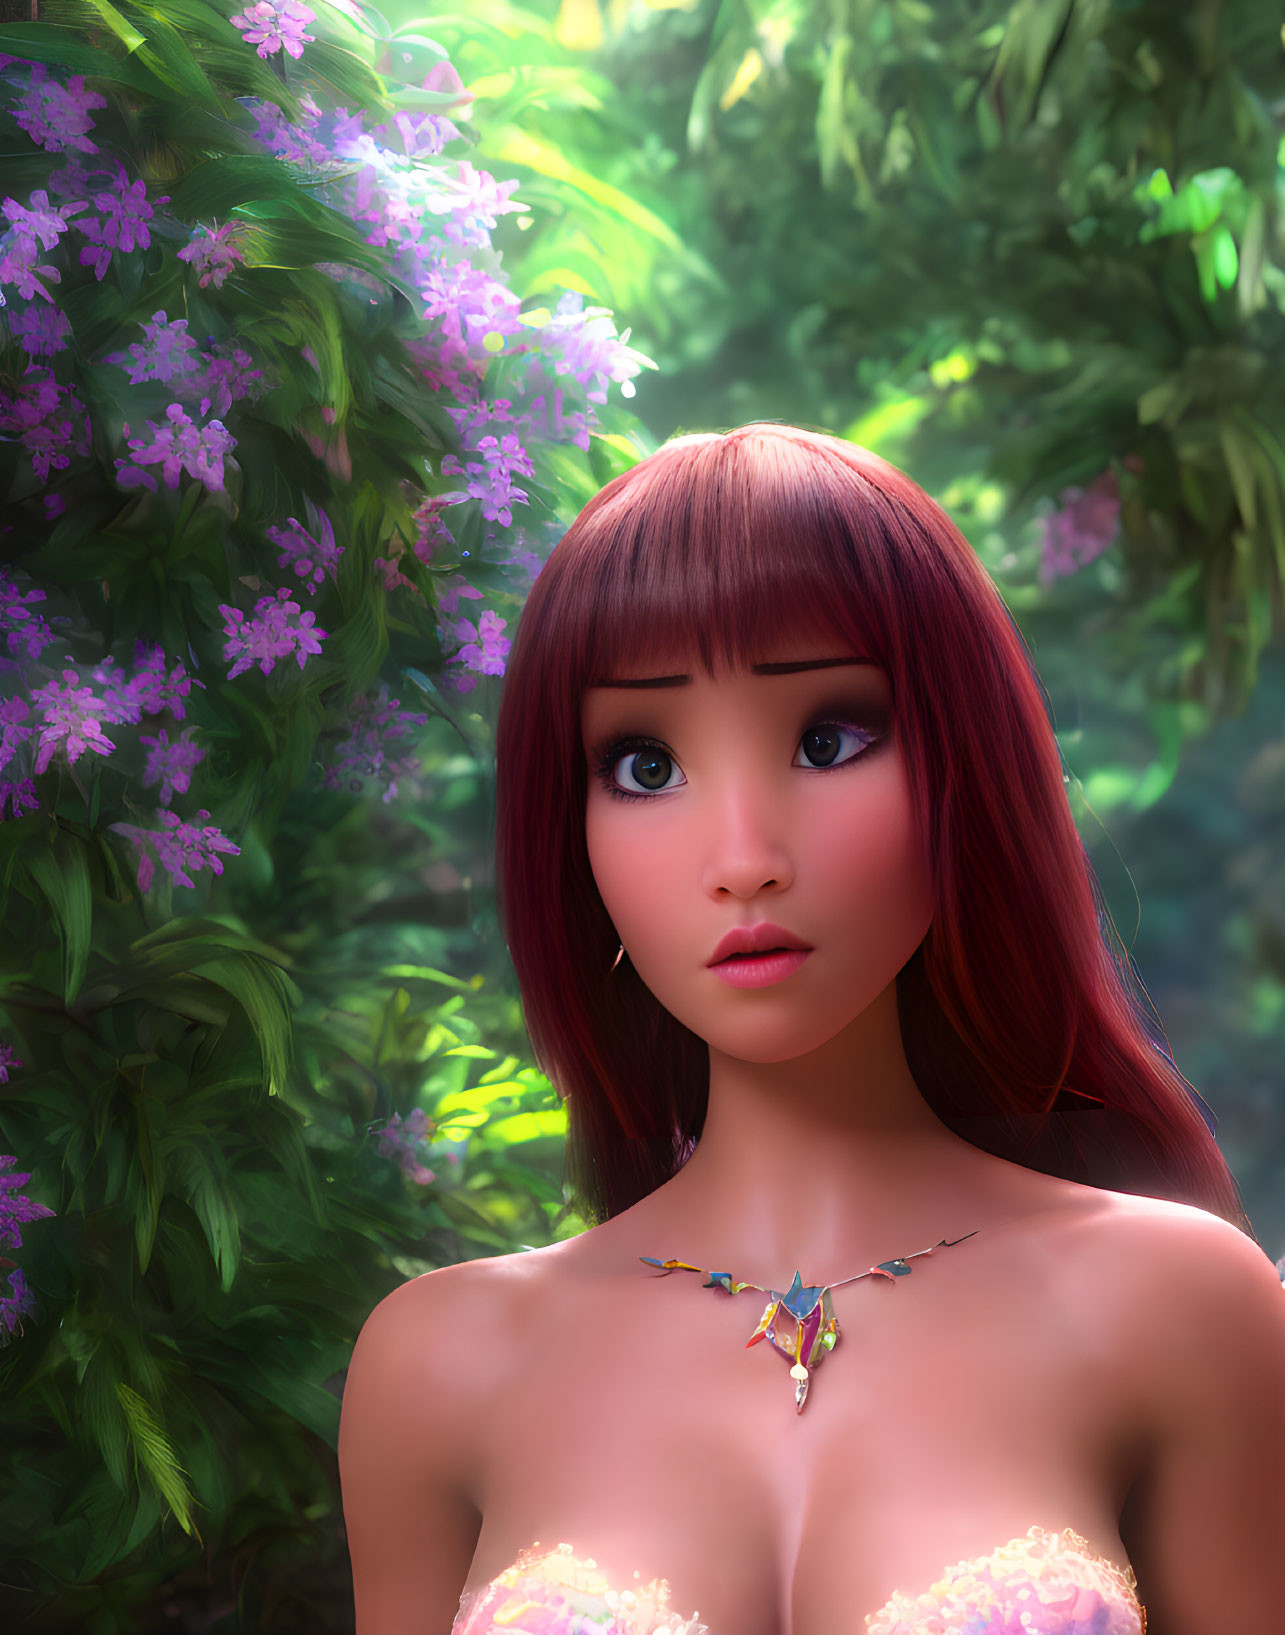 3D-rendered female character with red hair in lush greenery